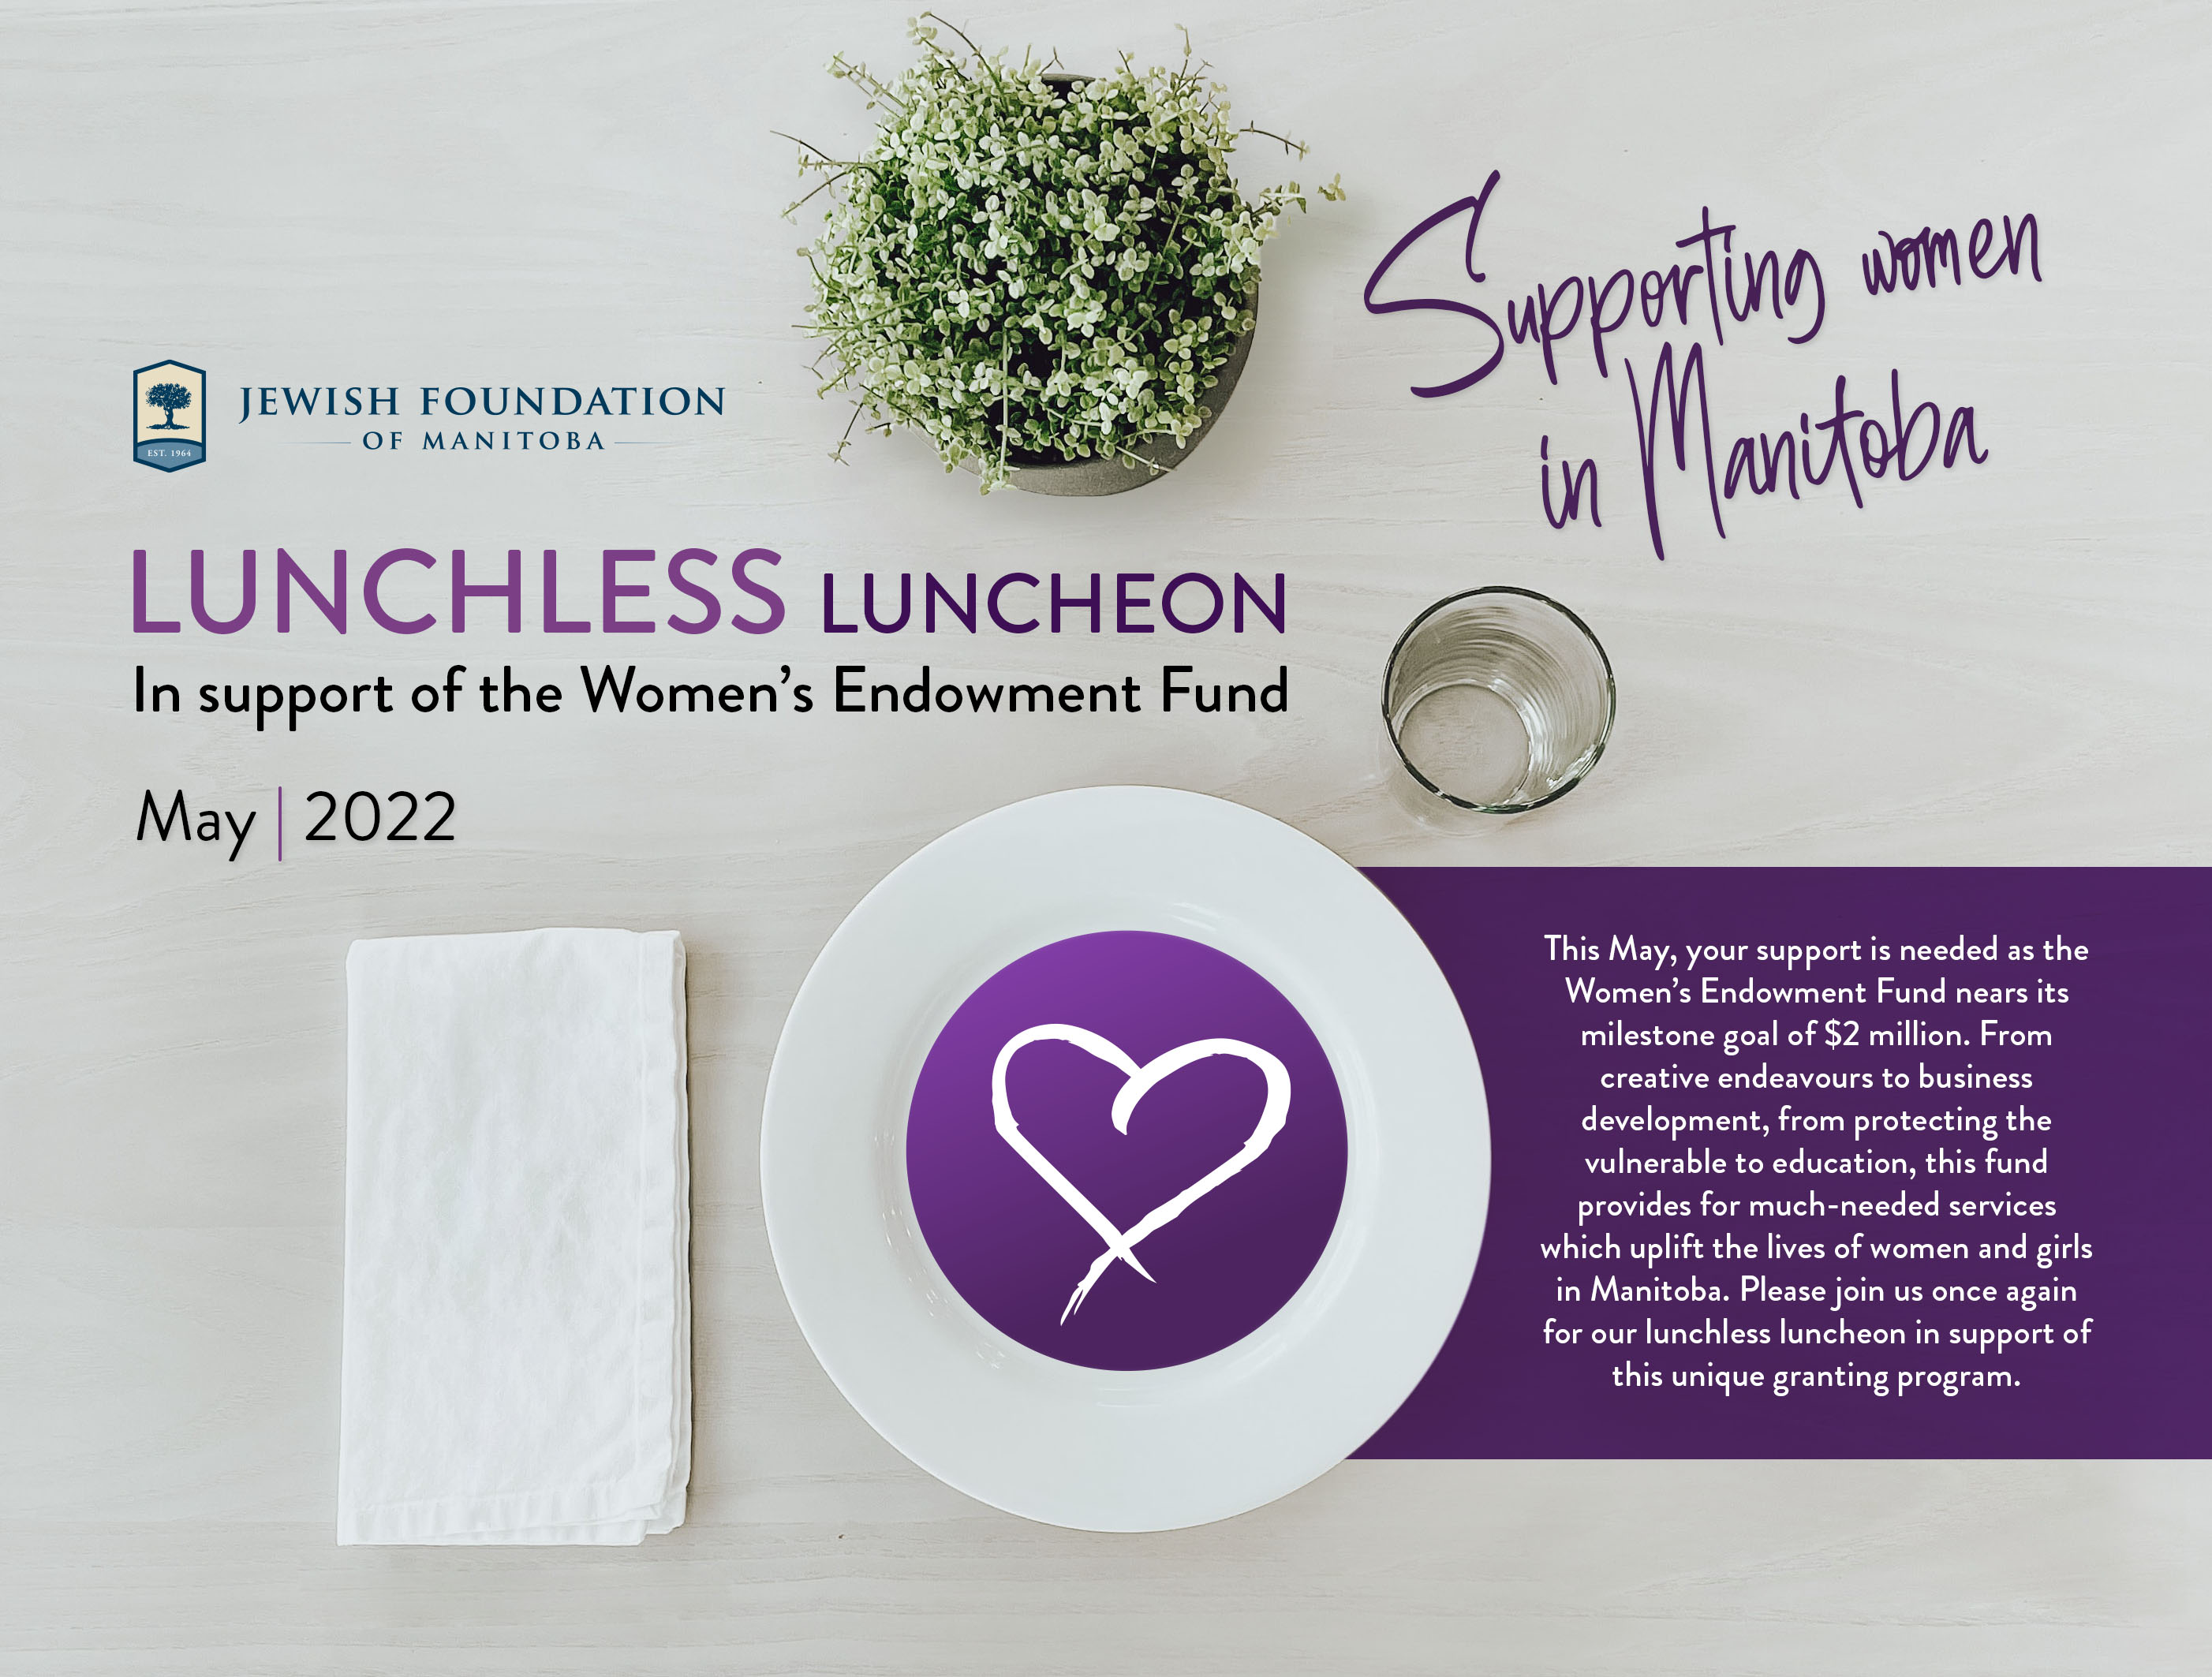 Lunchless Luncheon 2022